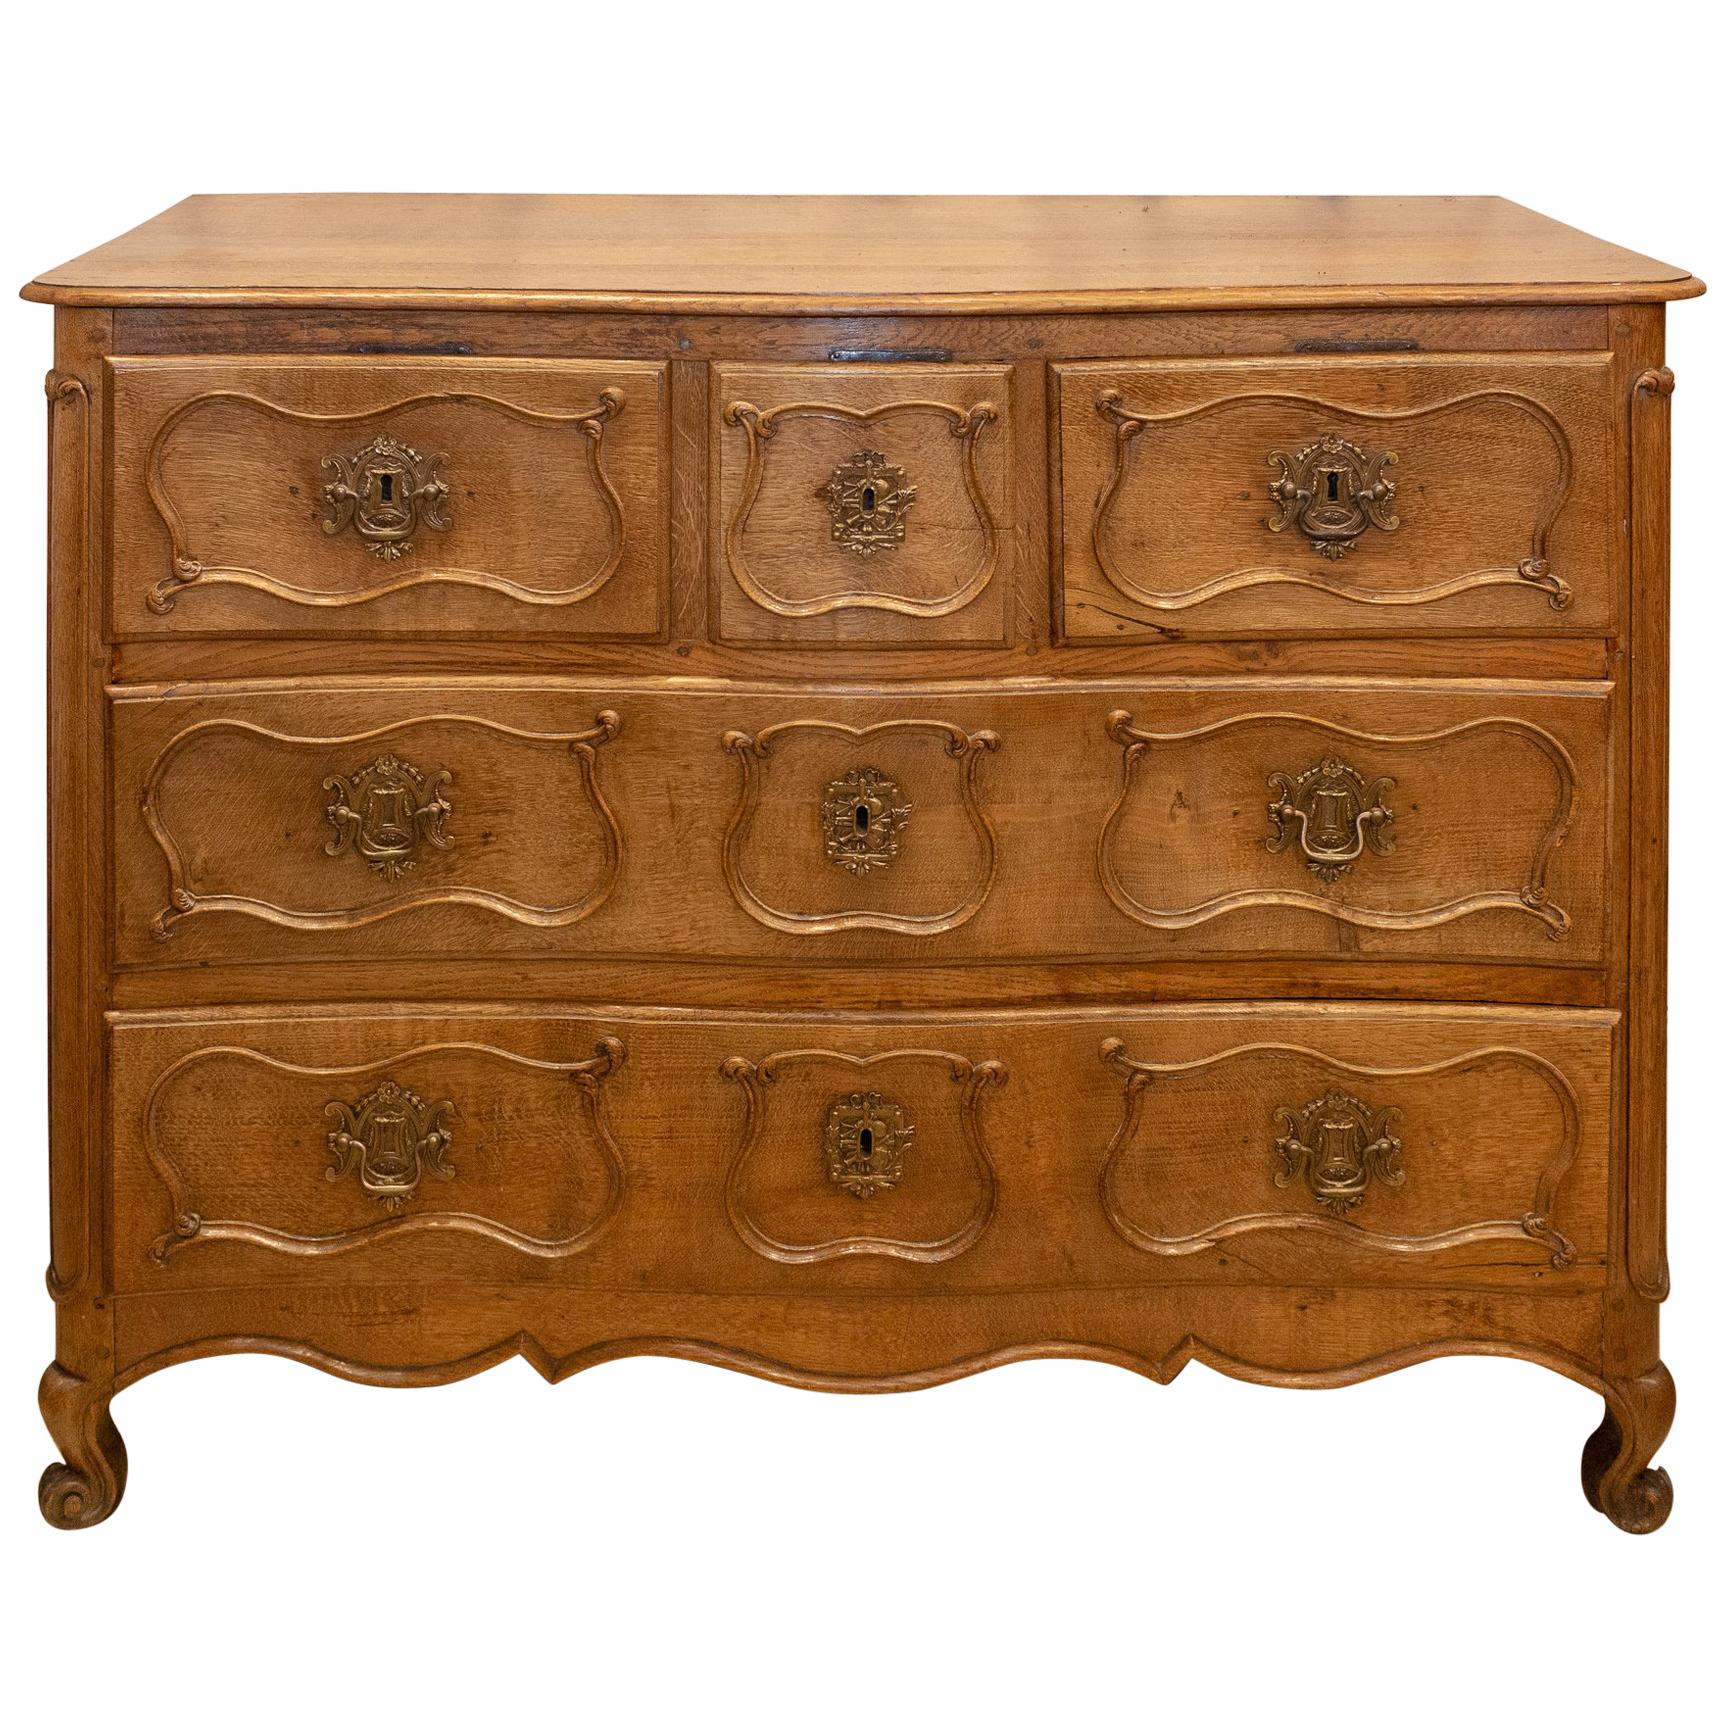 Antique French Curved-Front Chest of Drawers, circa 1900